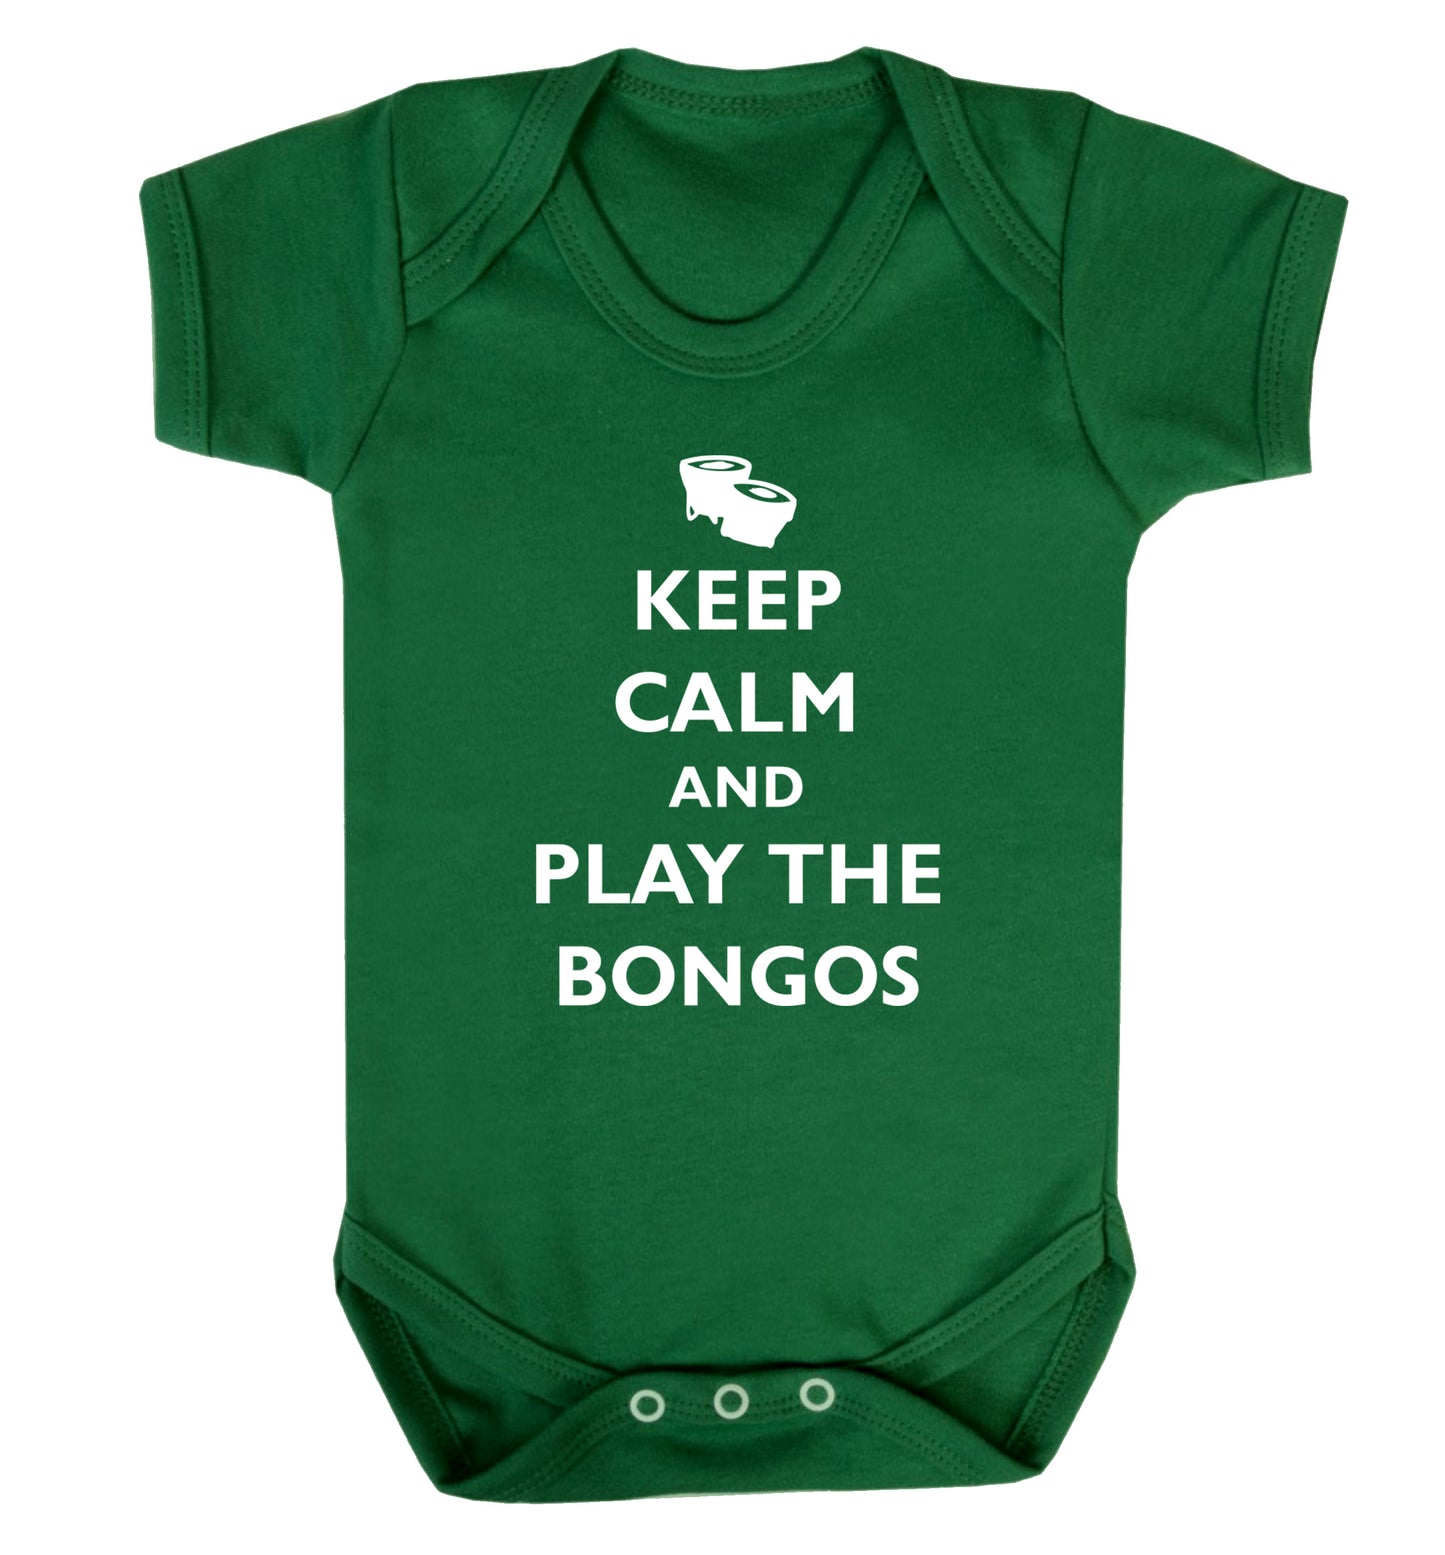 Keep calm and play the bongos Baby Vest green 18-24 months